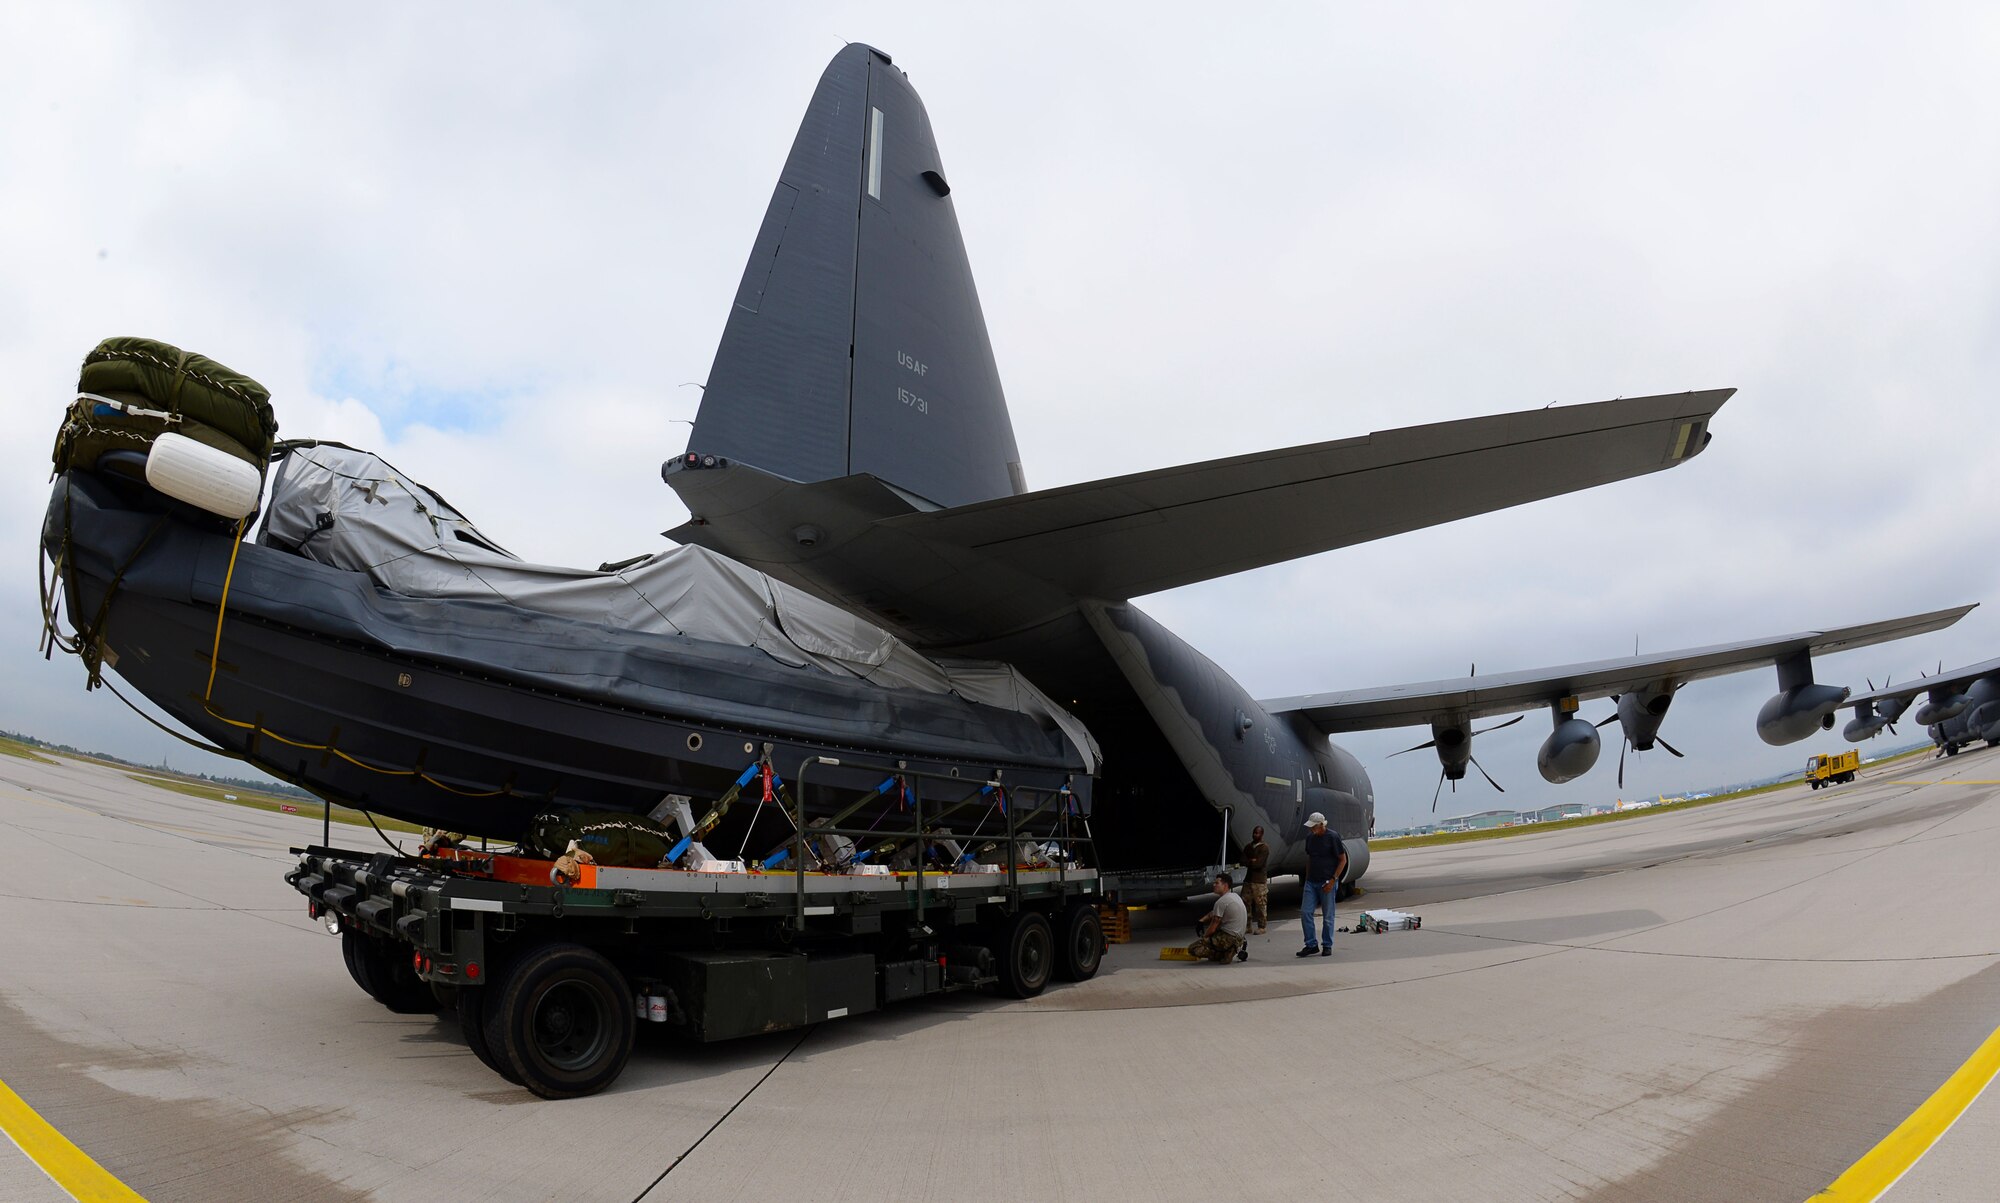 A Rigid Inflatable Boat is loaded onto an MC-130J Commando II in preparation for a Maritime Craft Aerial Delivery drop Sept. 26, 2016, at Stuttgart Air Base, Germany. Two of three MC-130J Commando IIs from the 67th Special Operations Squadron were loaded for MCADS drops in participation with the 2016 Night Hawk exercise. (U.S. Air Force photo by Senior Airman Justine Rho) 